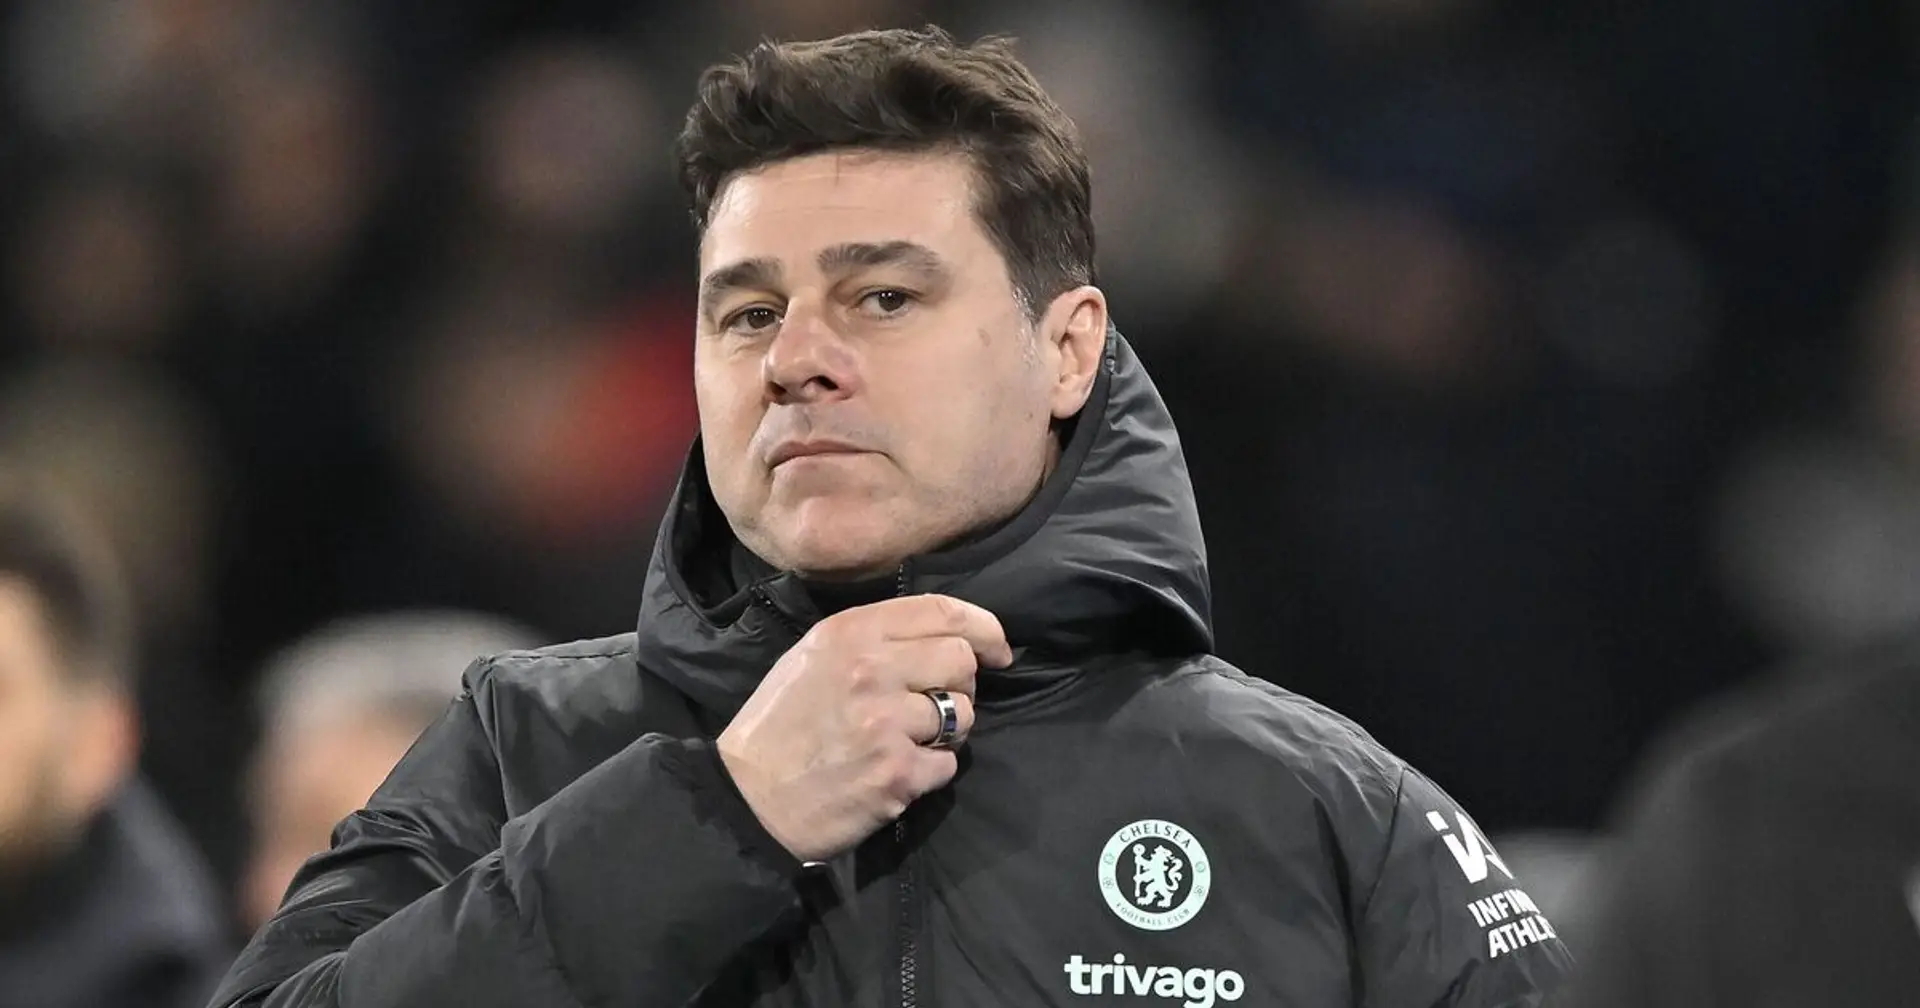 Is Poch getting sacked in the morning? Answered